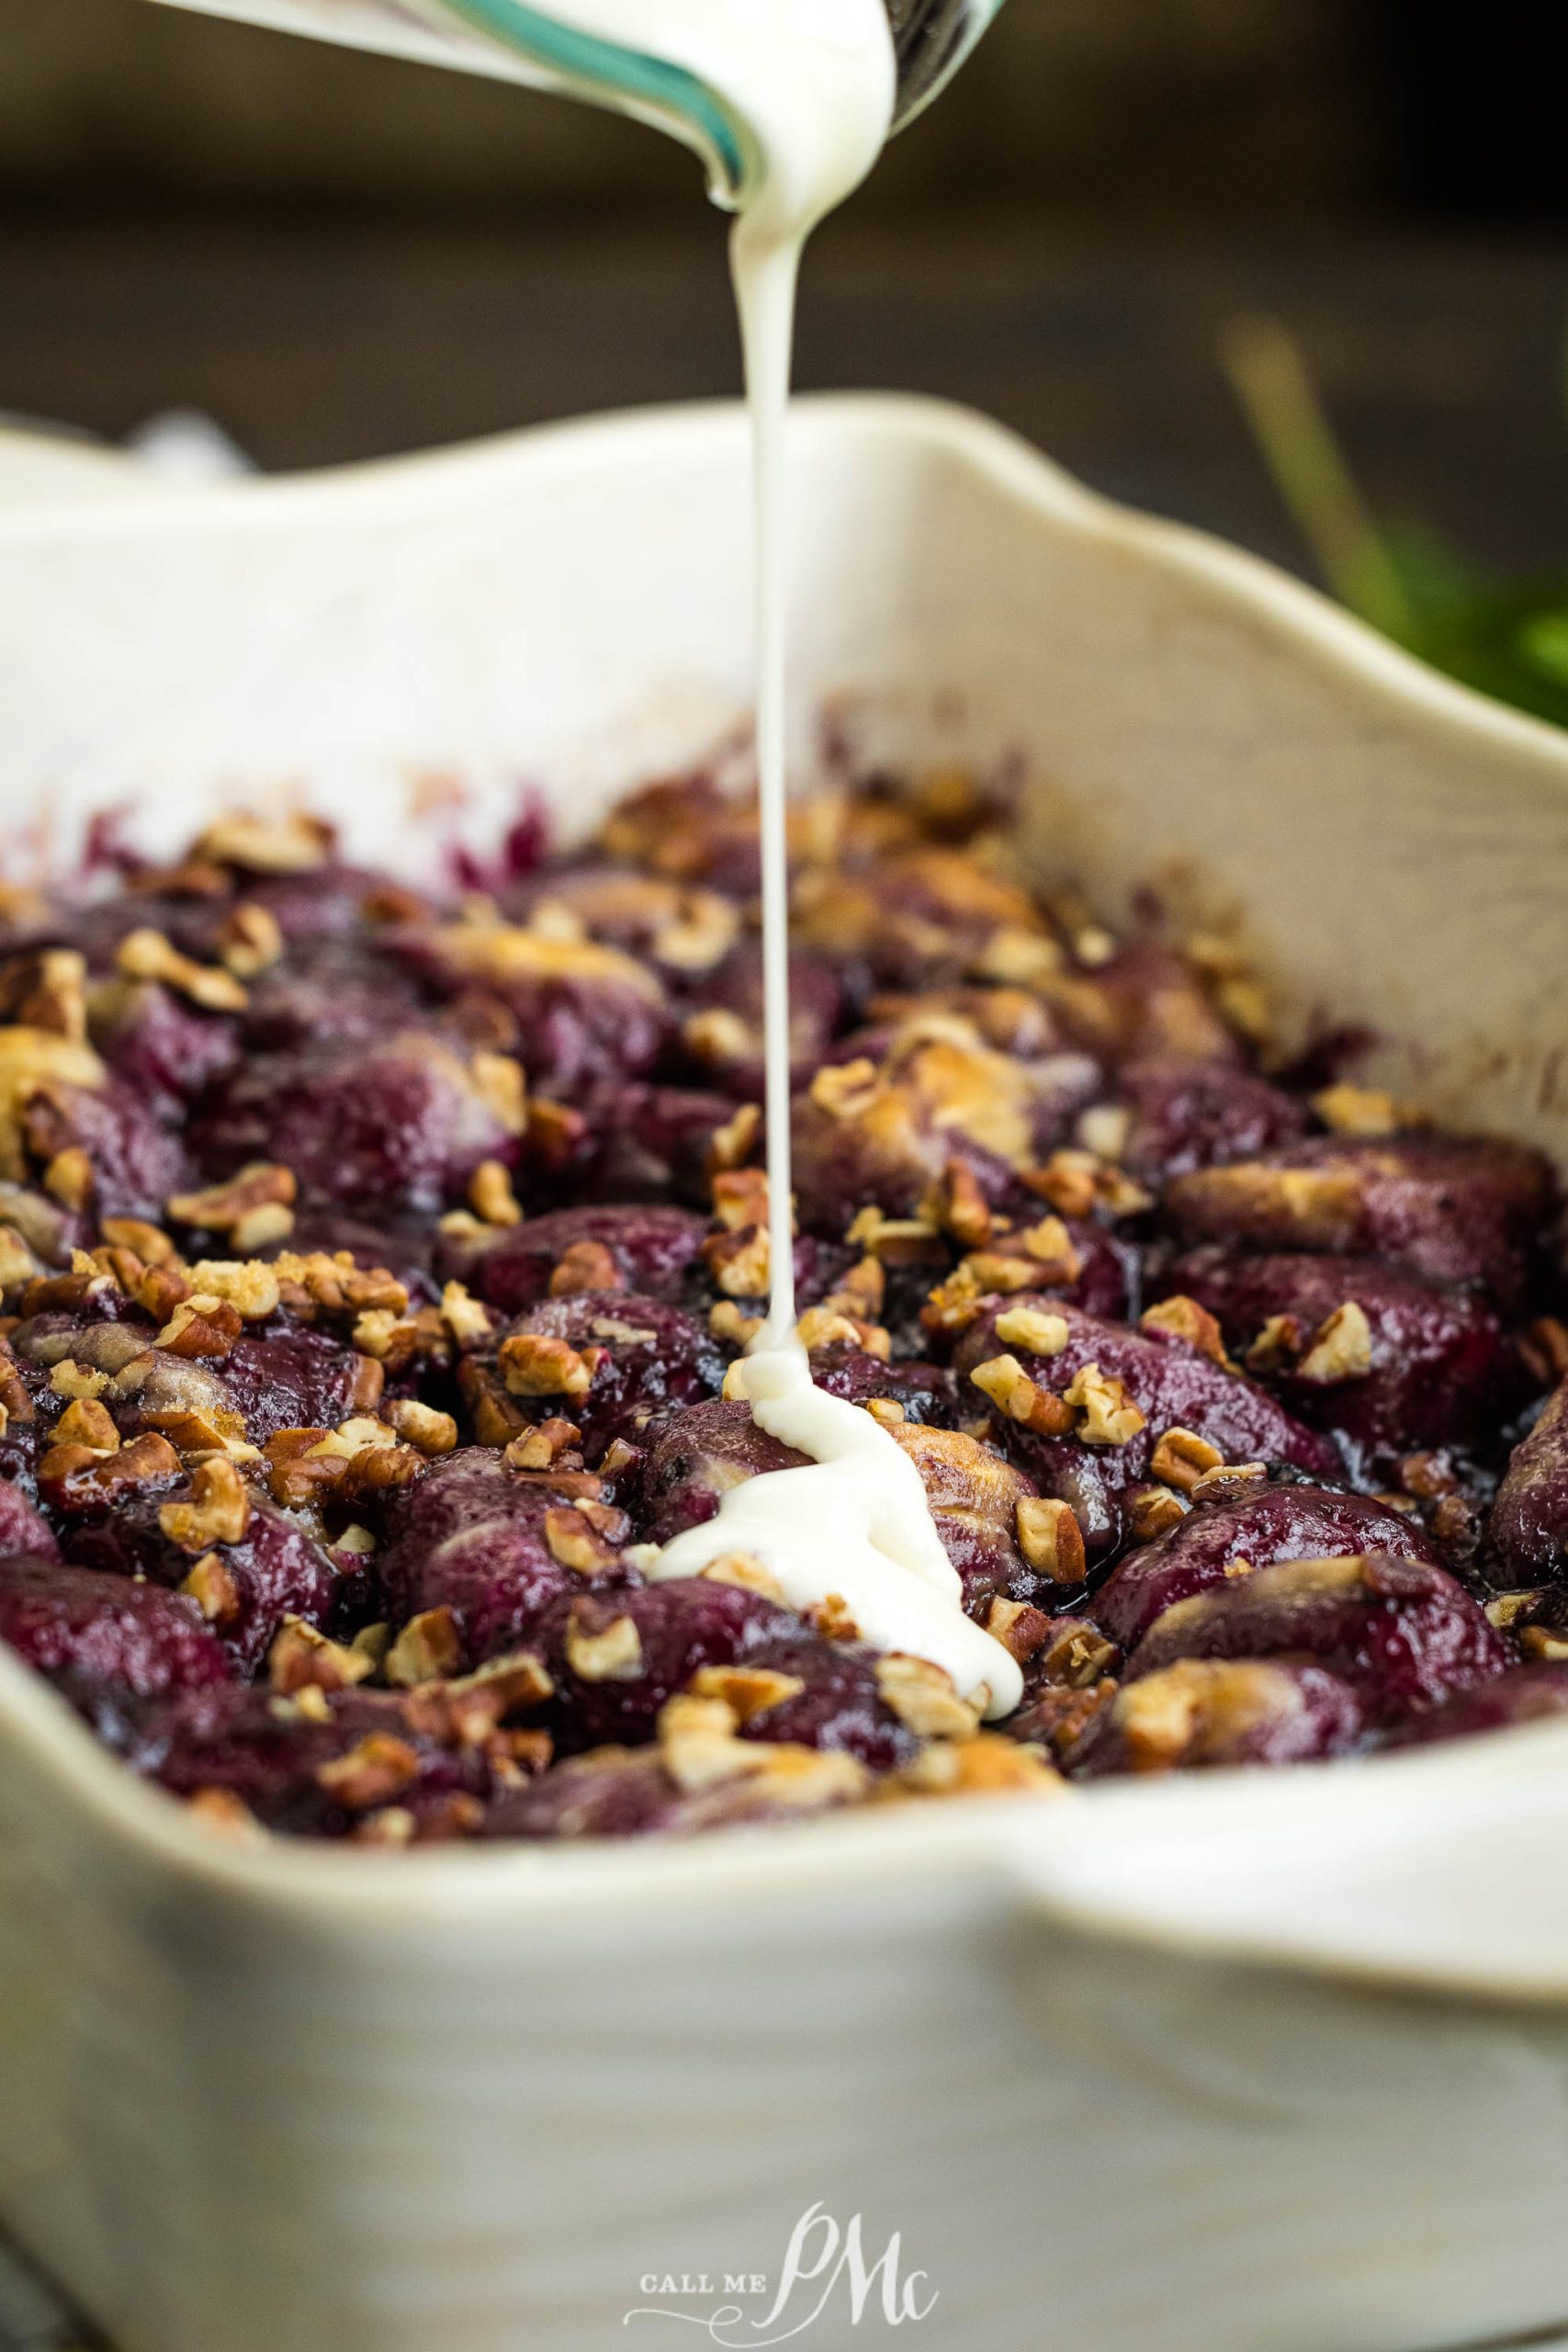 A baking dish filled with a berry and nut mixture is being drizzled with a white cream sauce.